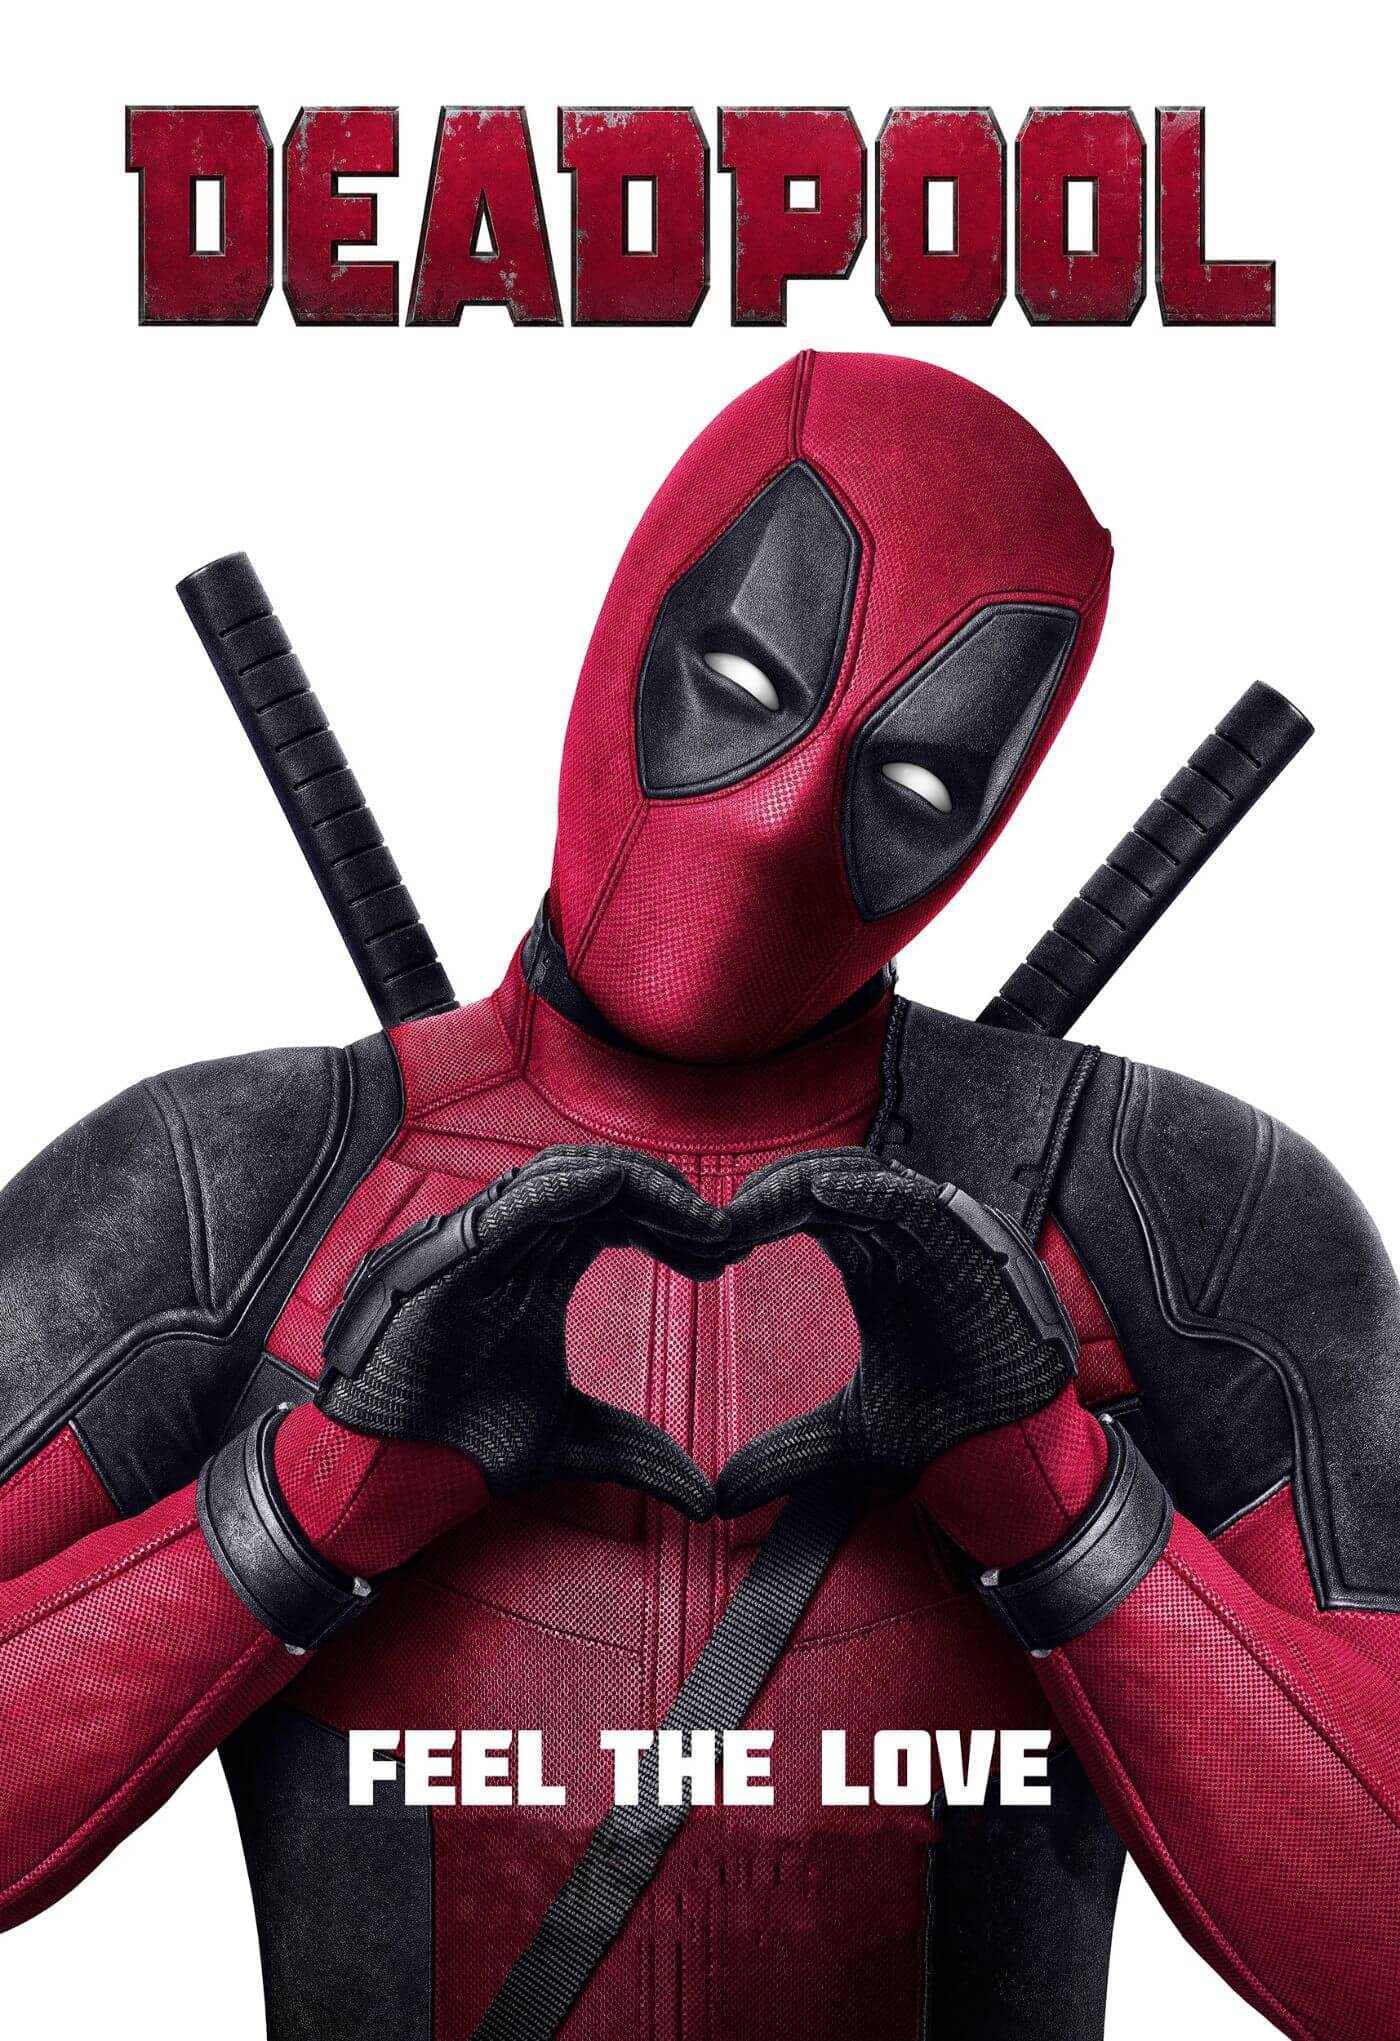 Movie Poster Art - Deadpool - Valentine Love - Tallenge Hollywood Poster Collection - Framed Prints by Brooke